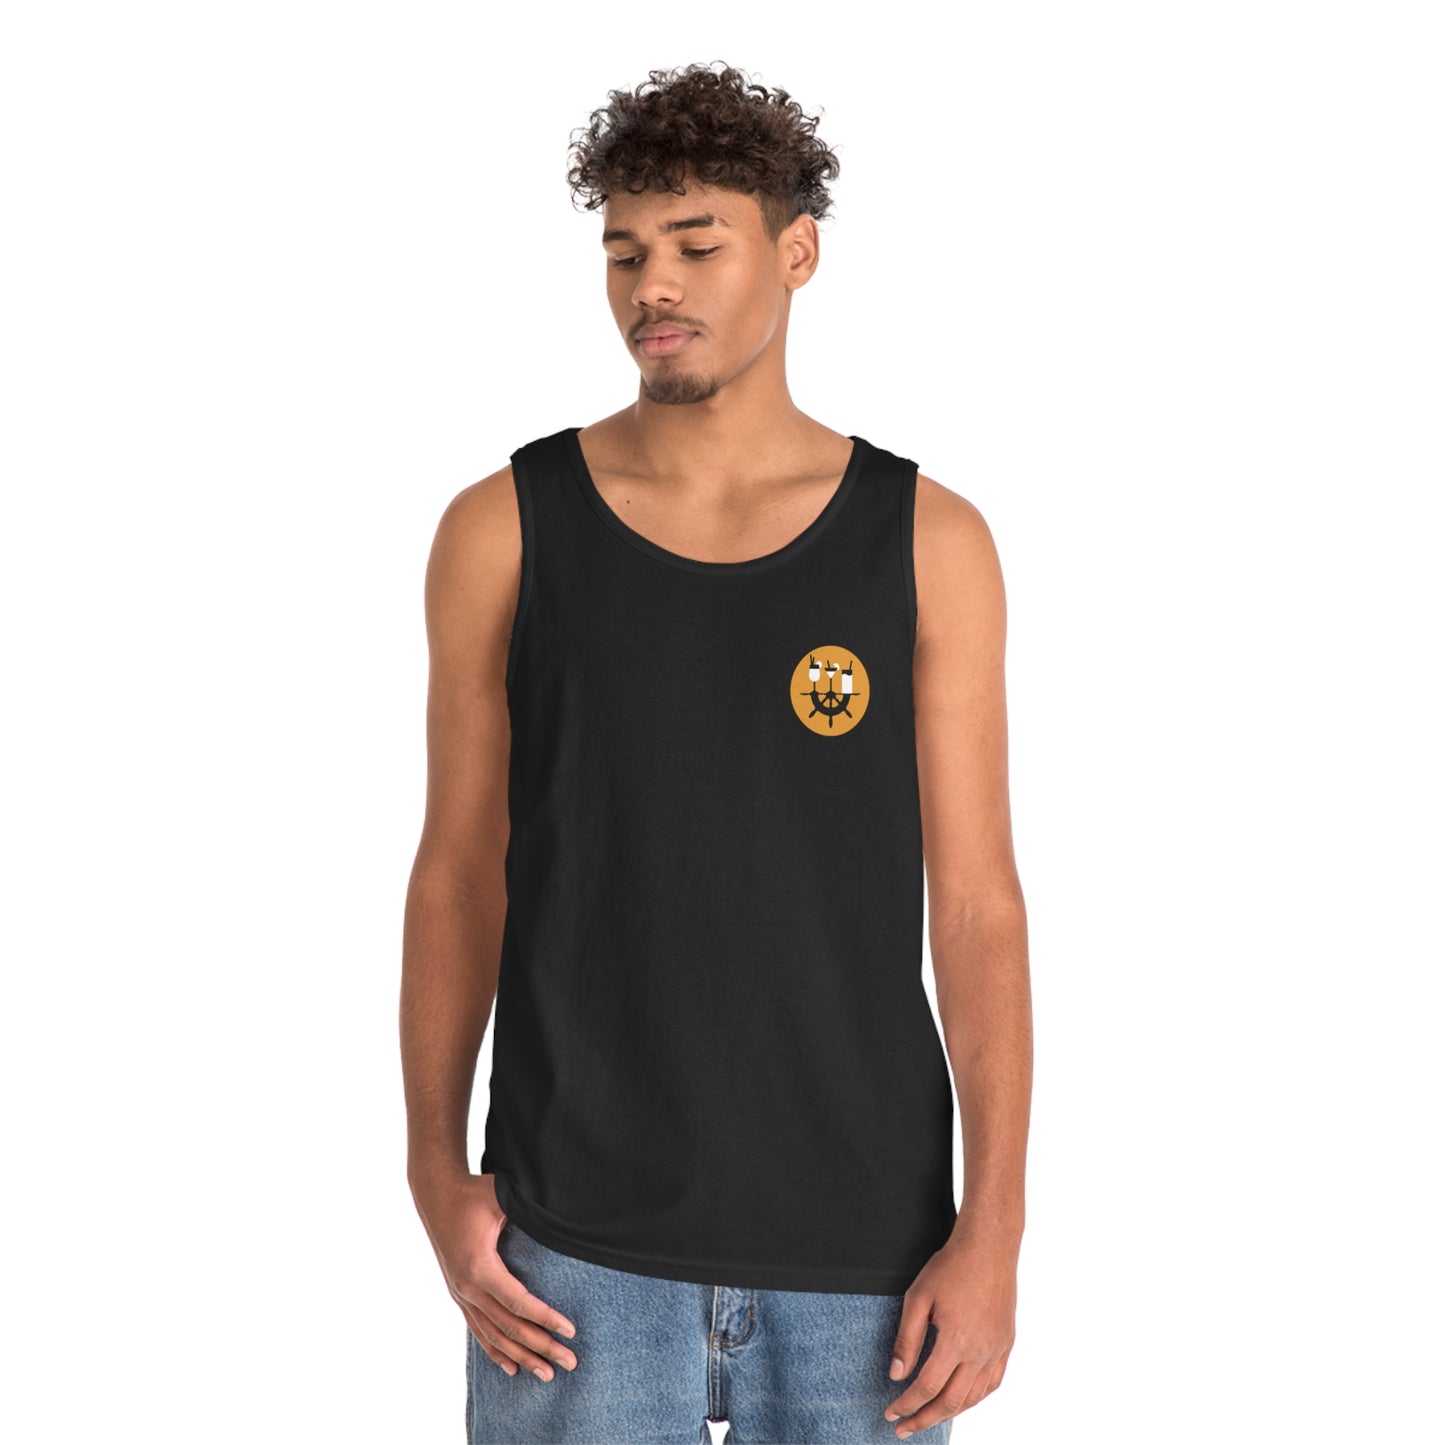 I'm the Captain - Tank Top